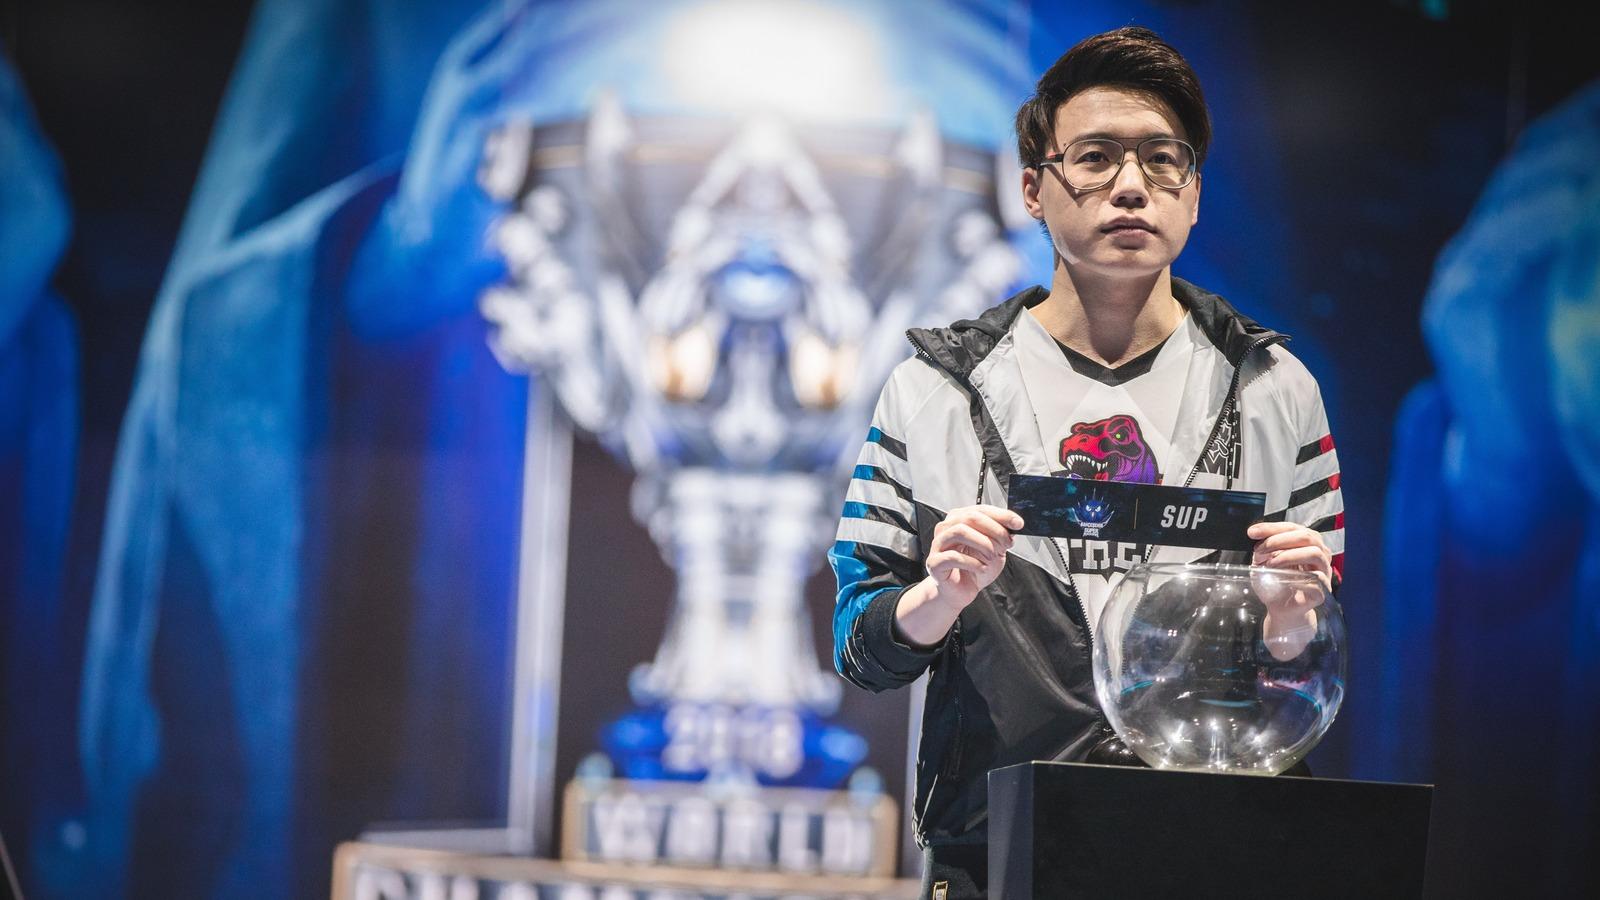 League's newest champion Hwei launches with abysmal 30% win rate - Dexerto